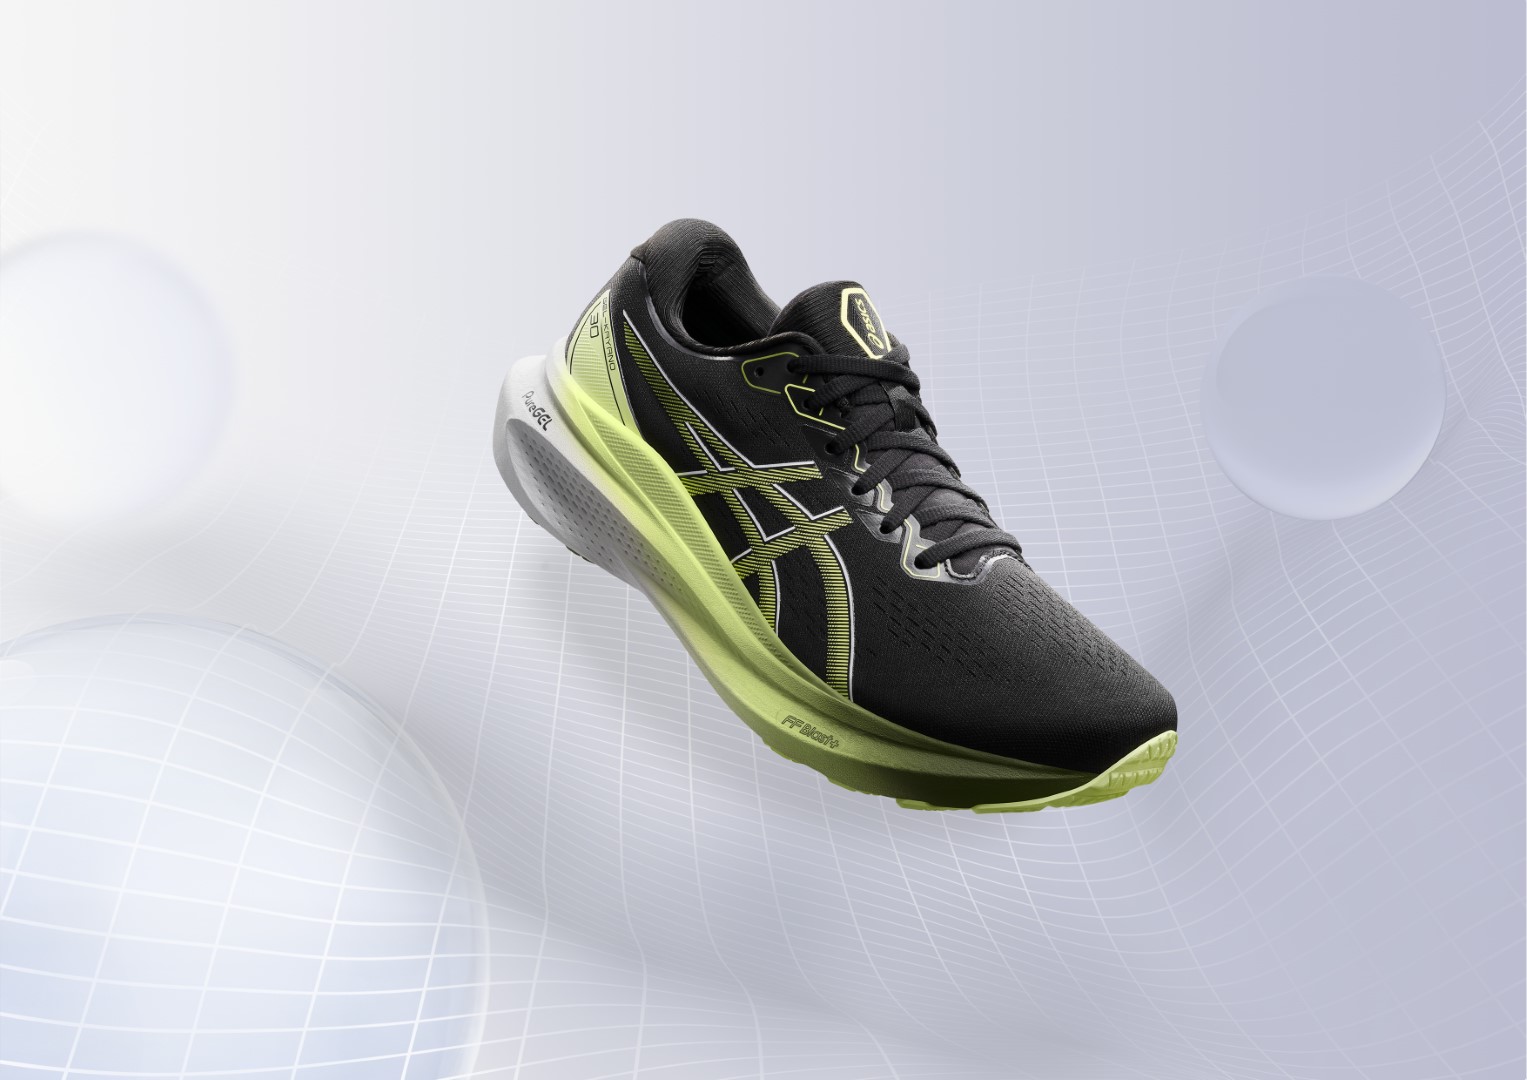 ASICS Introduces the GEL-KAYANO™ 30: Elevating the Comfort of Stability Running Shoes